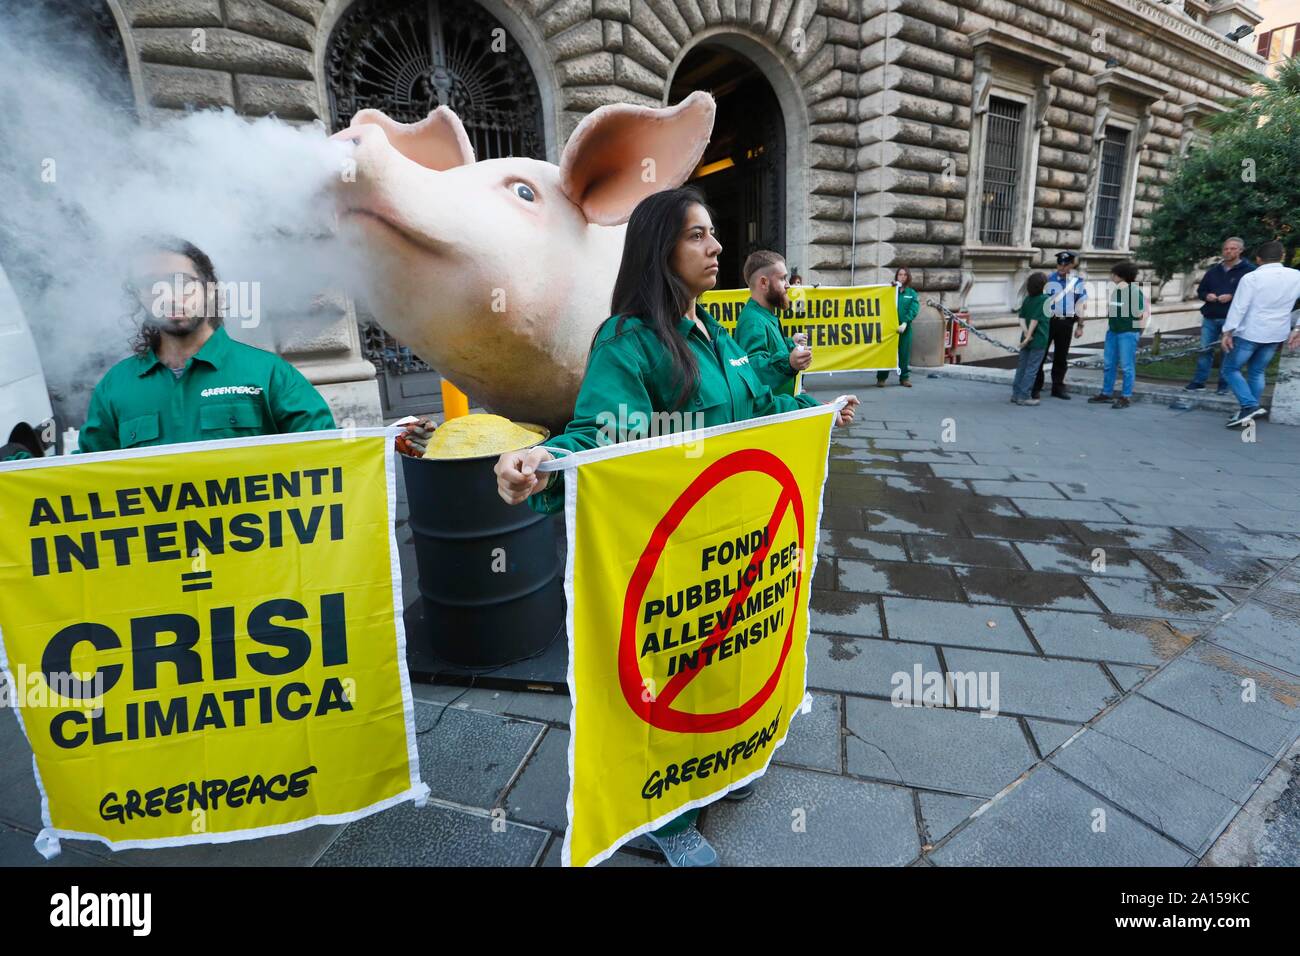 Italy, Rome, September 24, 2019 : Greenpeace activists protest in front of the Ministry of Agriculture, to demand the suspension of funding for intens Stock Photo